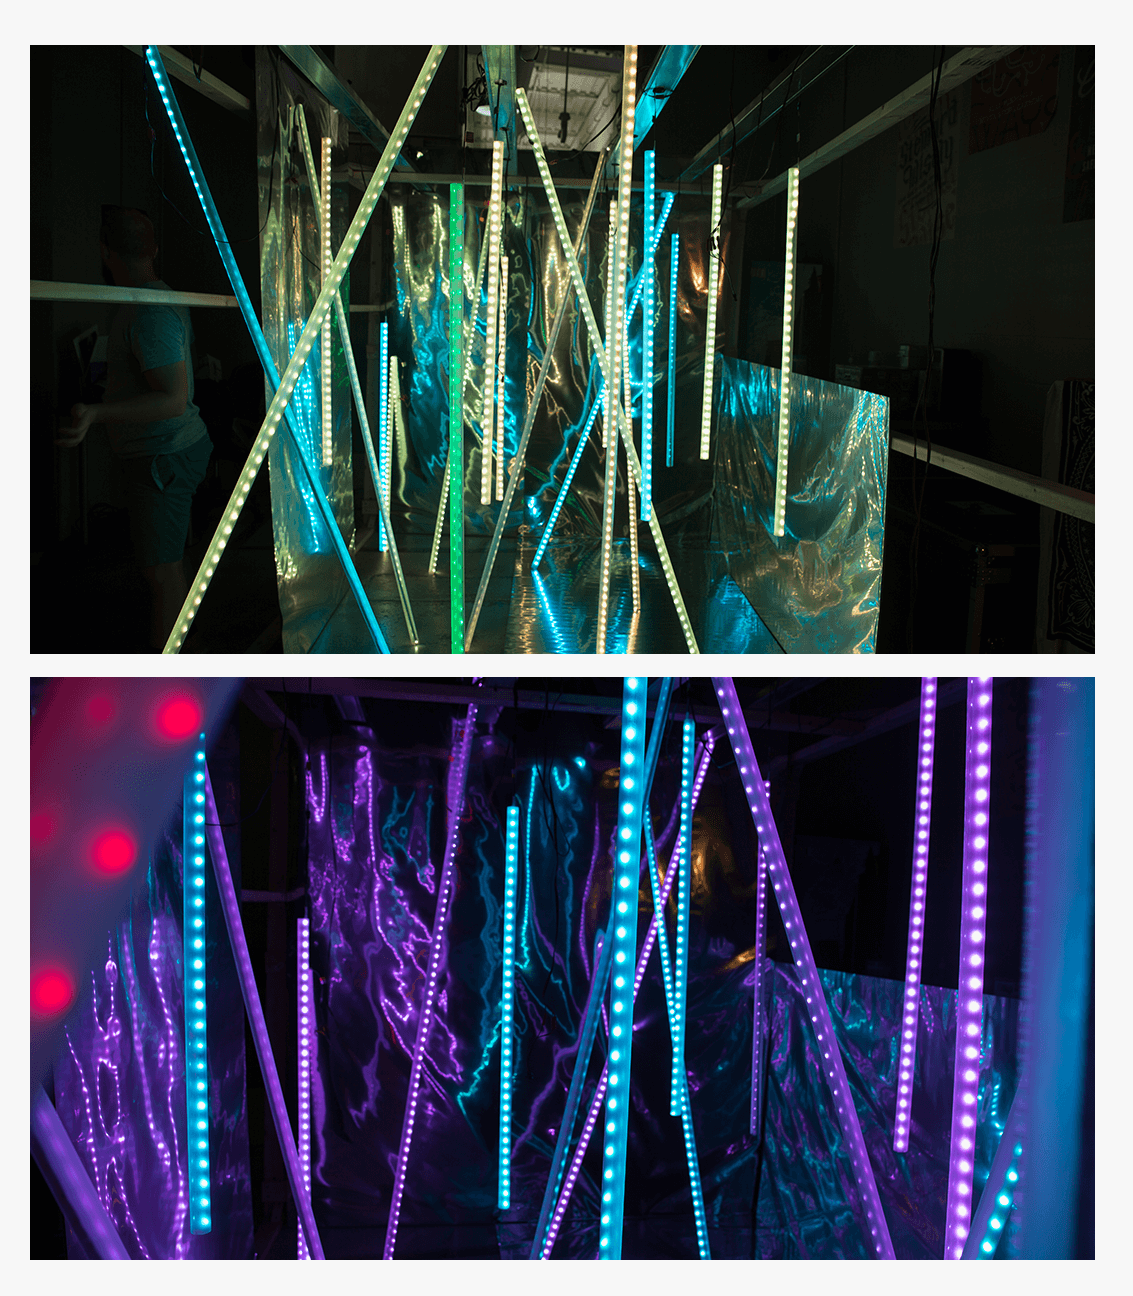 Progress photo of the LED Tube art installation at ST8MNT Brand Agency for the Bonnaroo Music & Arts Festival in Manchester, Tennessee